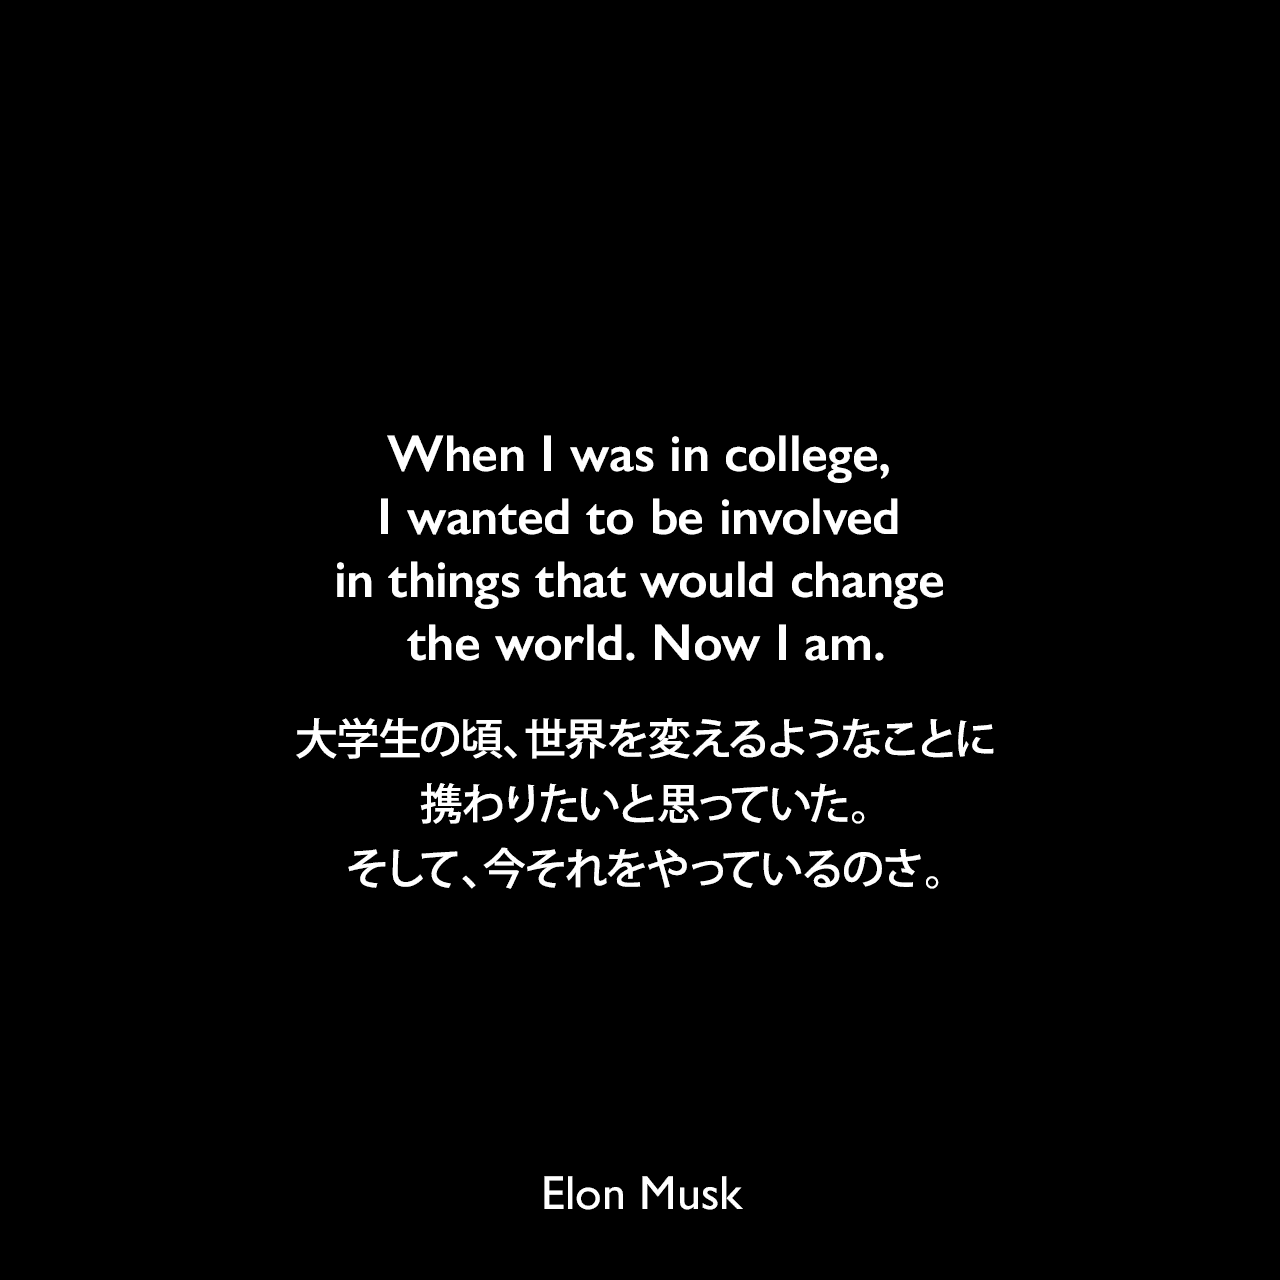 When I was in college, I wanted to be involved in things that would change the world. Now I am.大学生の頃、世界を変えるようなことに携わりたいと思っていた。そして、今それをやっているのさ。